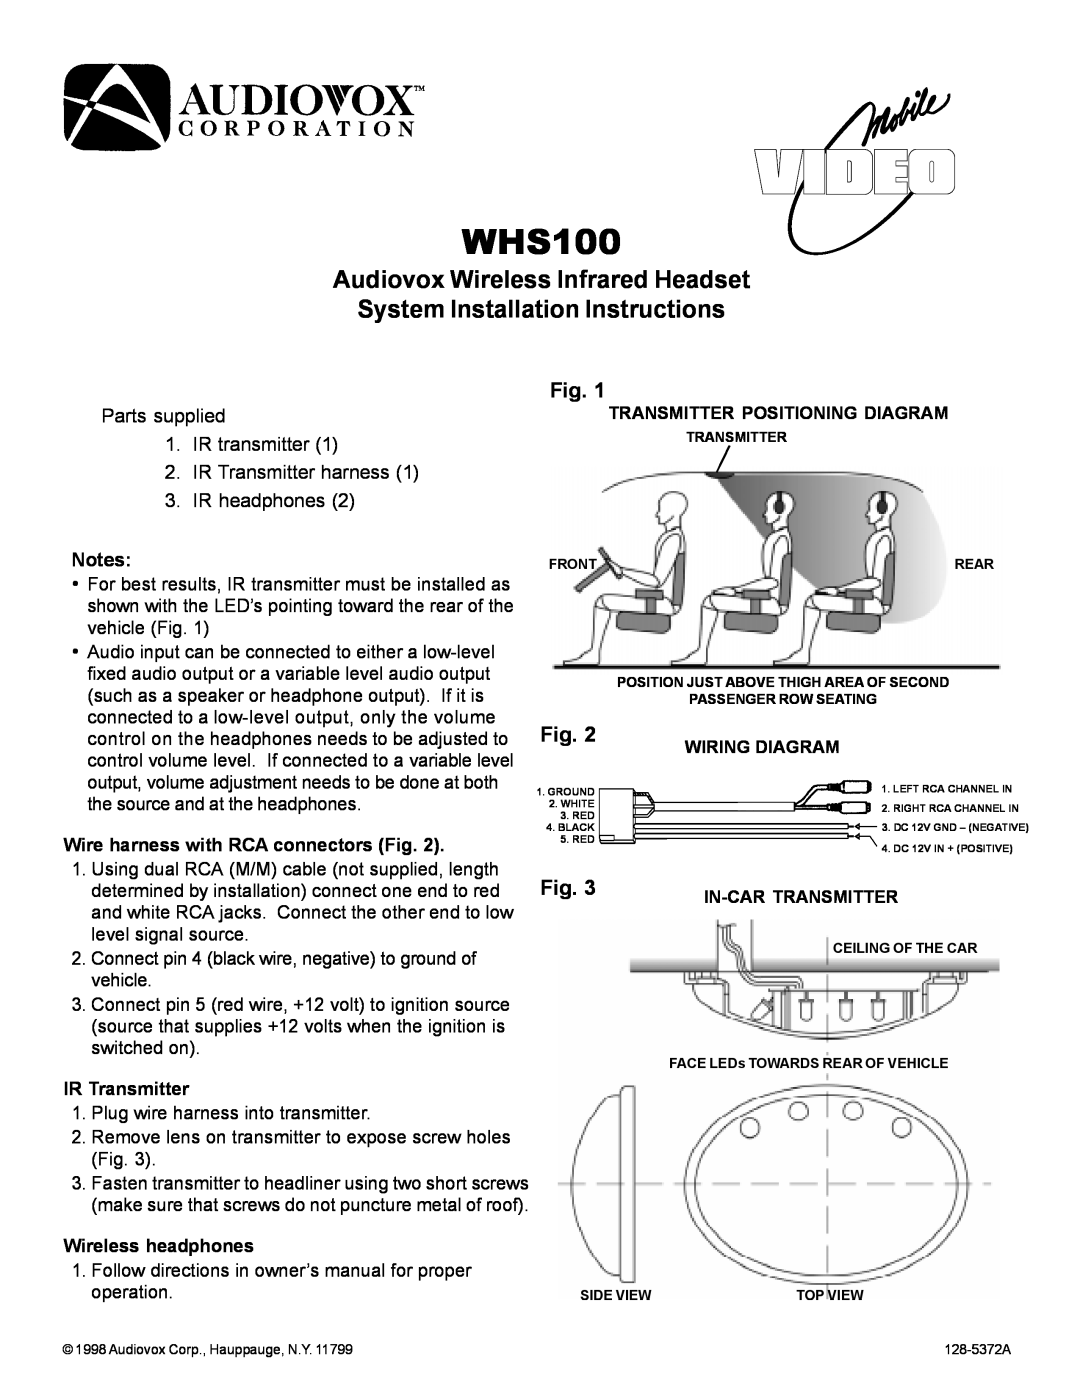 Audiovox WHS100 installation instructions Audiovox Wireless Infrared Headset, System Installation Instructions 